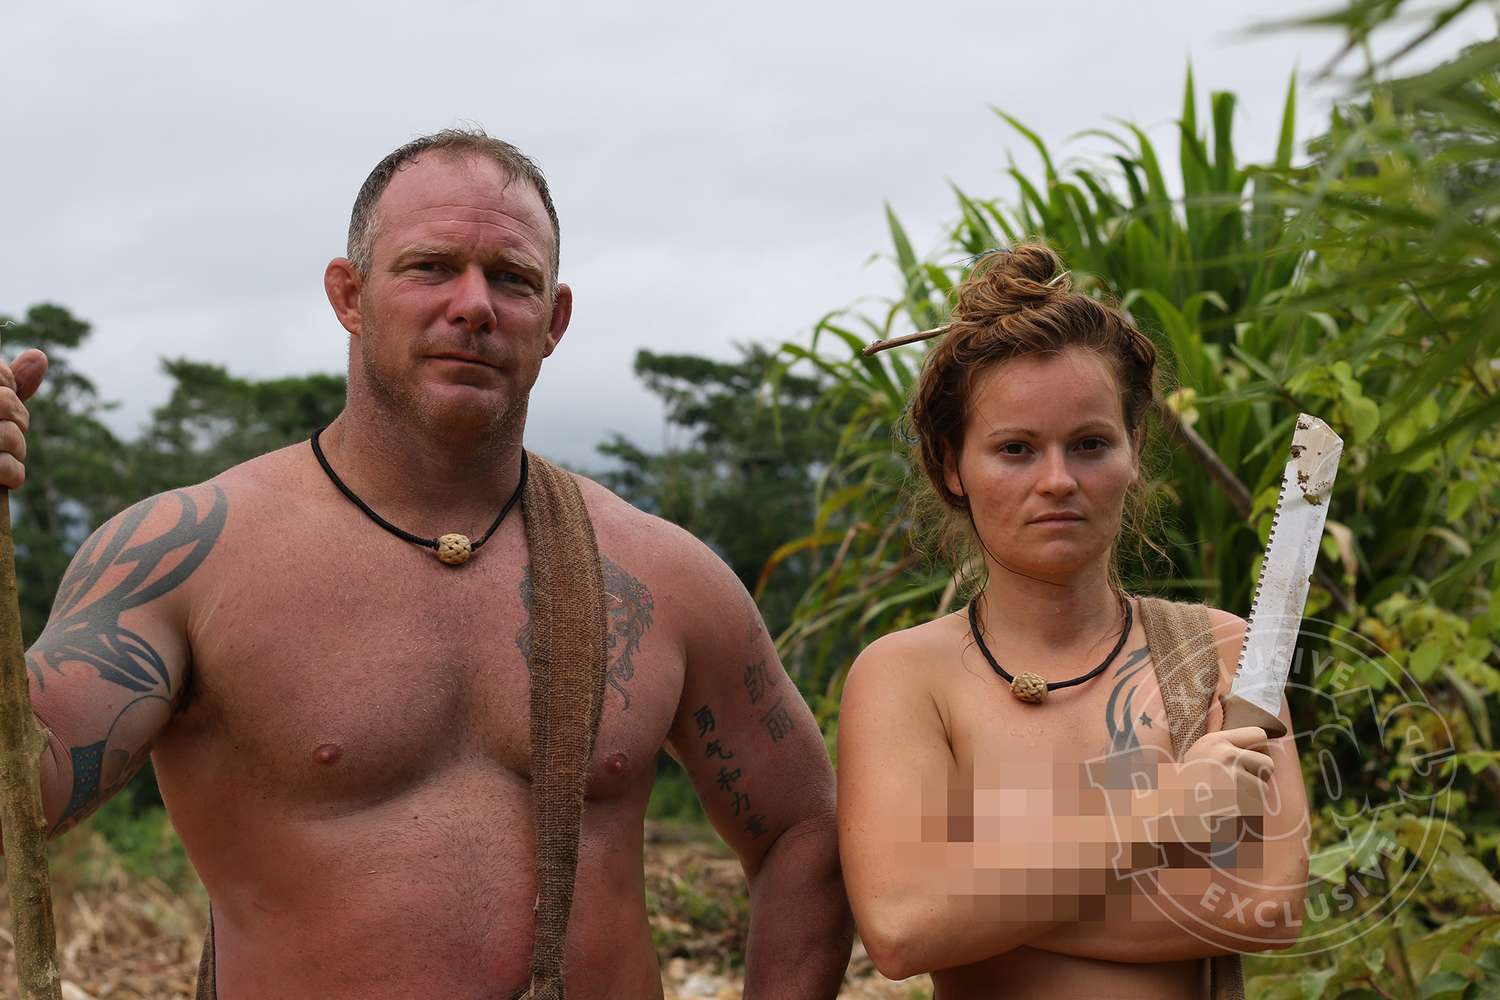 carl augustine add naked and afraid pictures photo